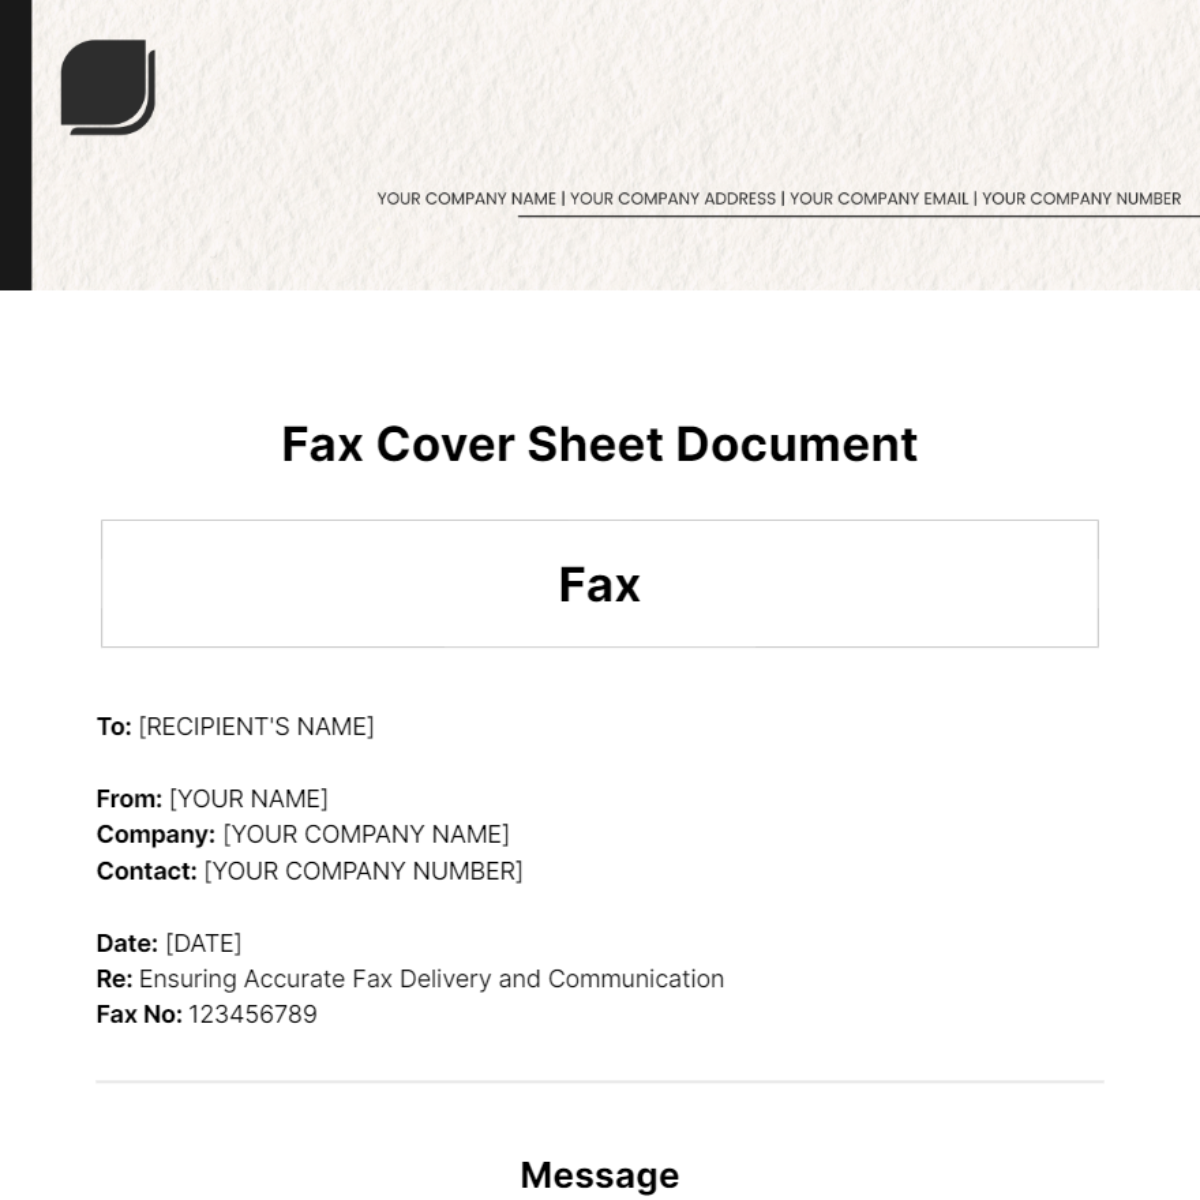 Fax Cover Sheet Document Template